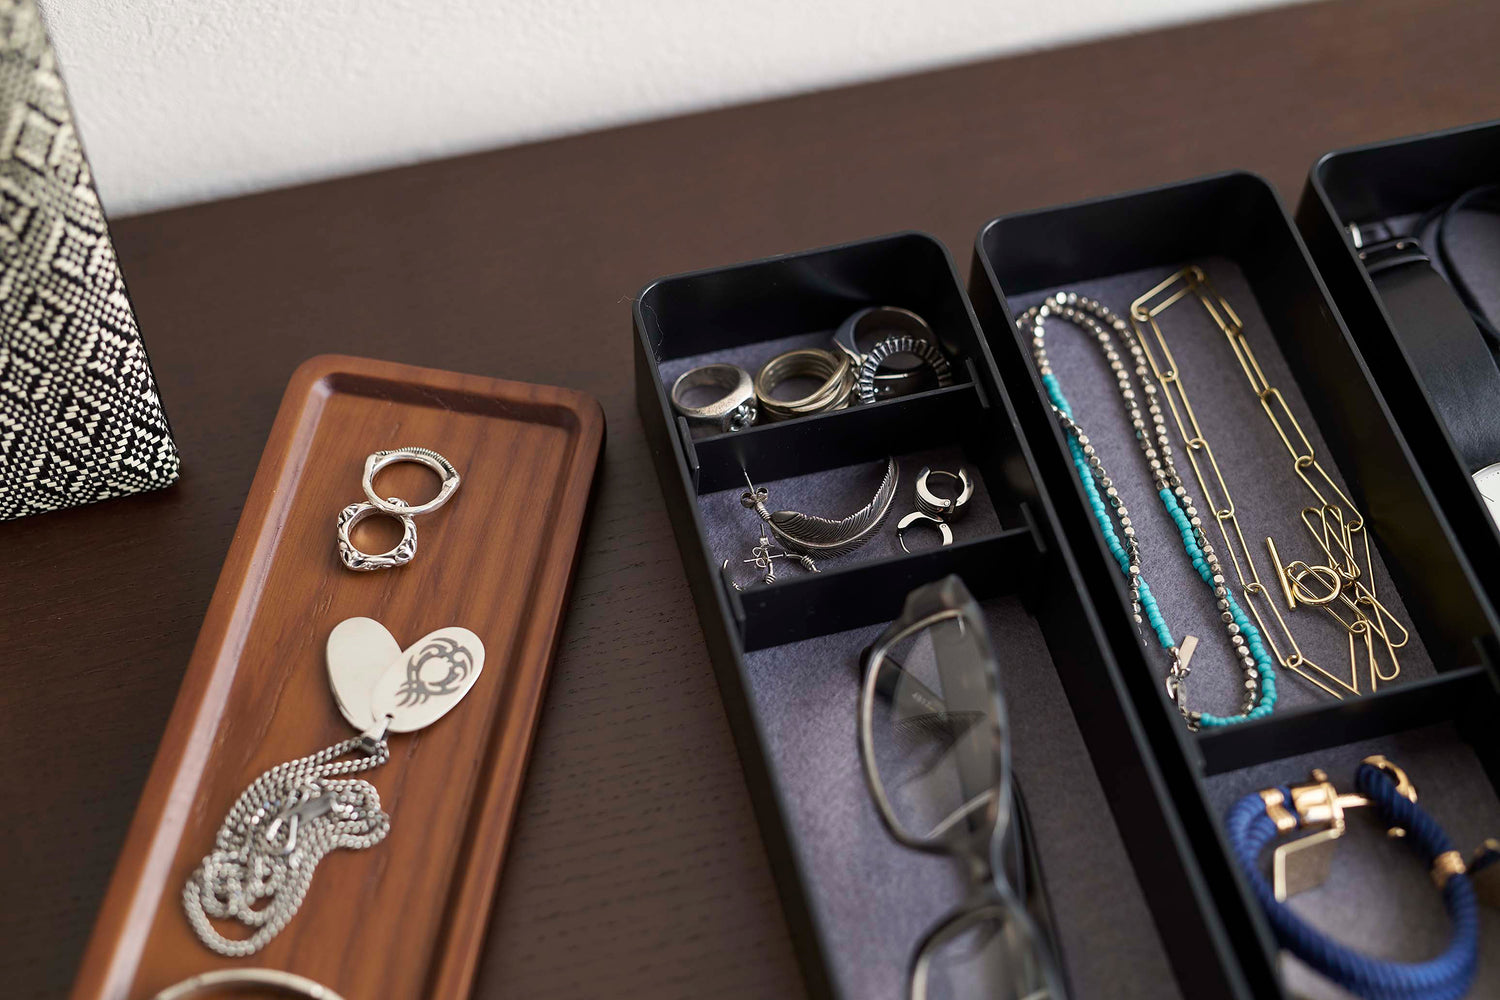 View 16 - Close up of black Stacking Watch and Accessory Case opened with glasses and jewelry